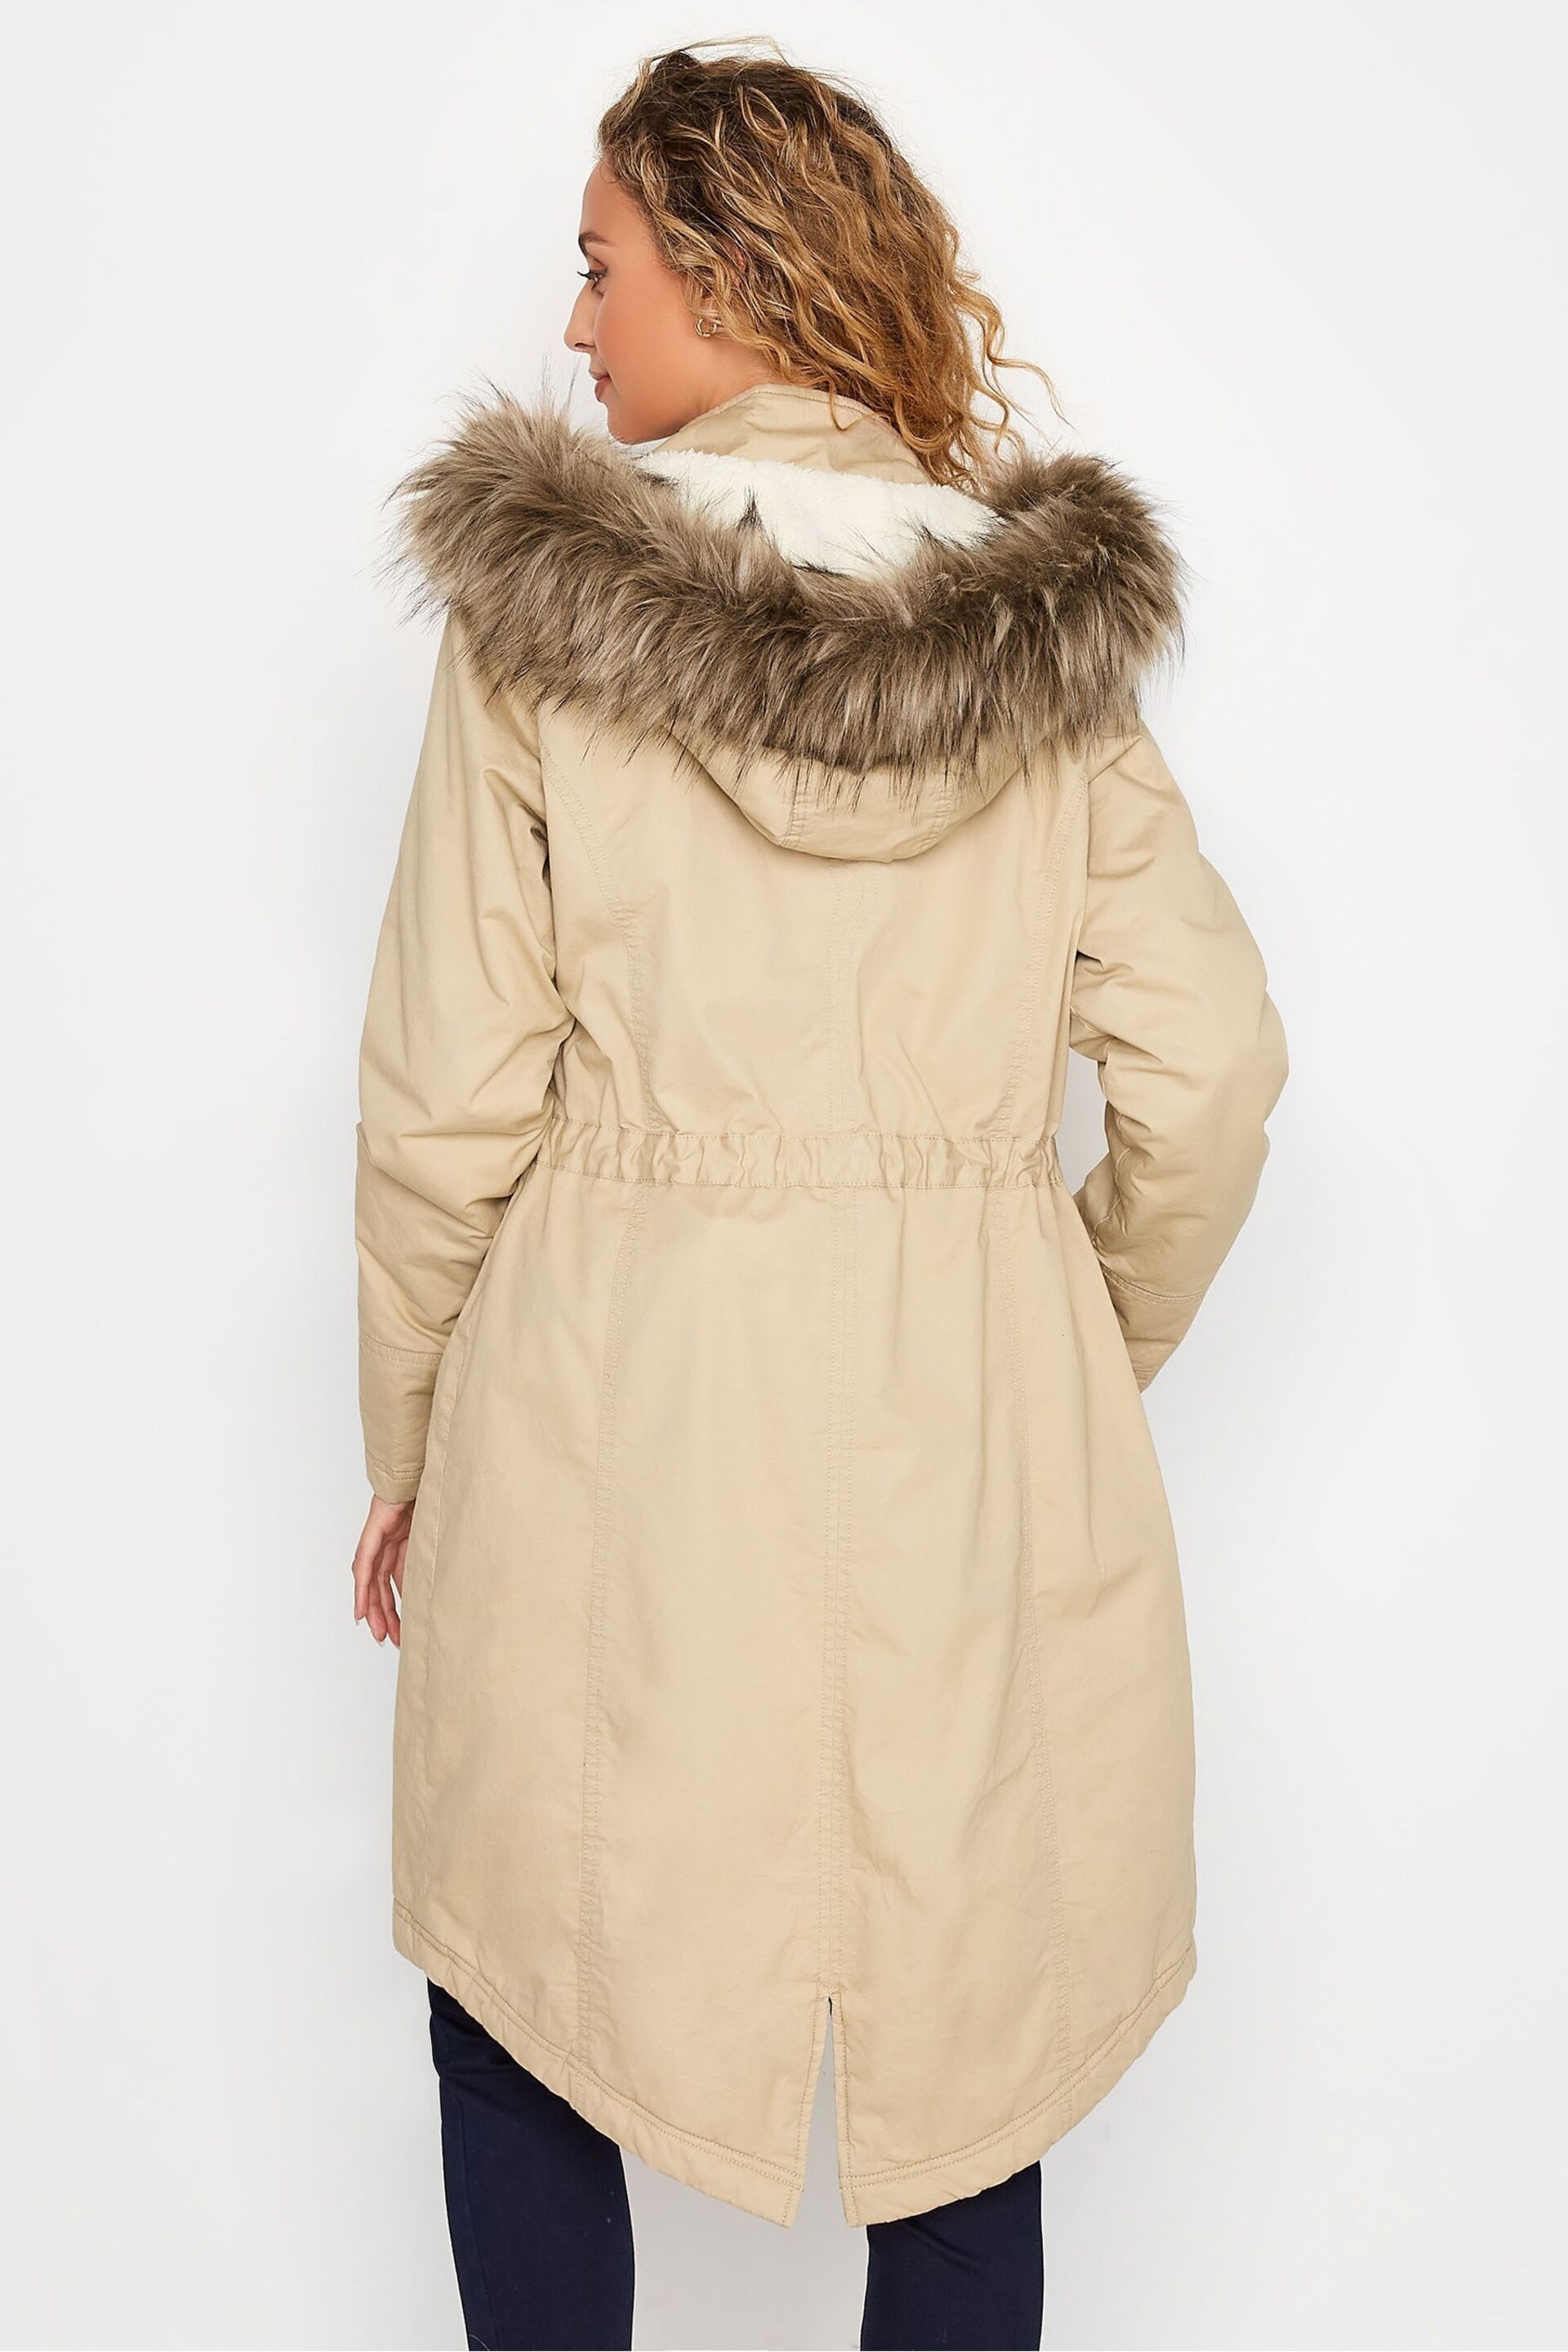 Long Tall Sally Natural Maternity Faux Fur Trim Parka - Image 2 of 5